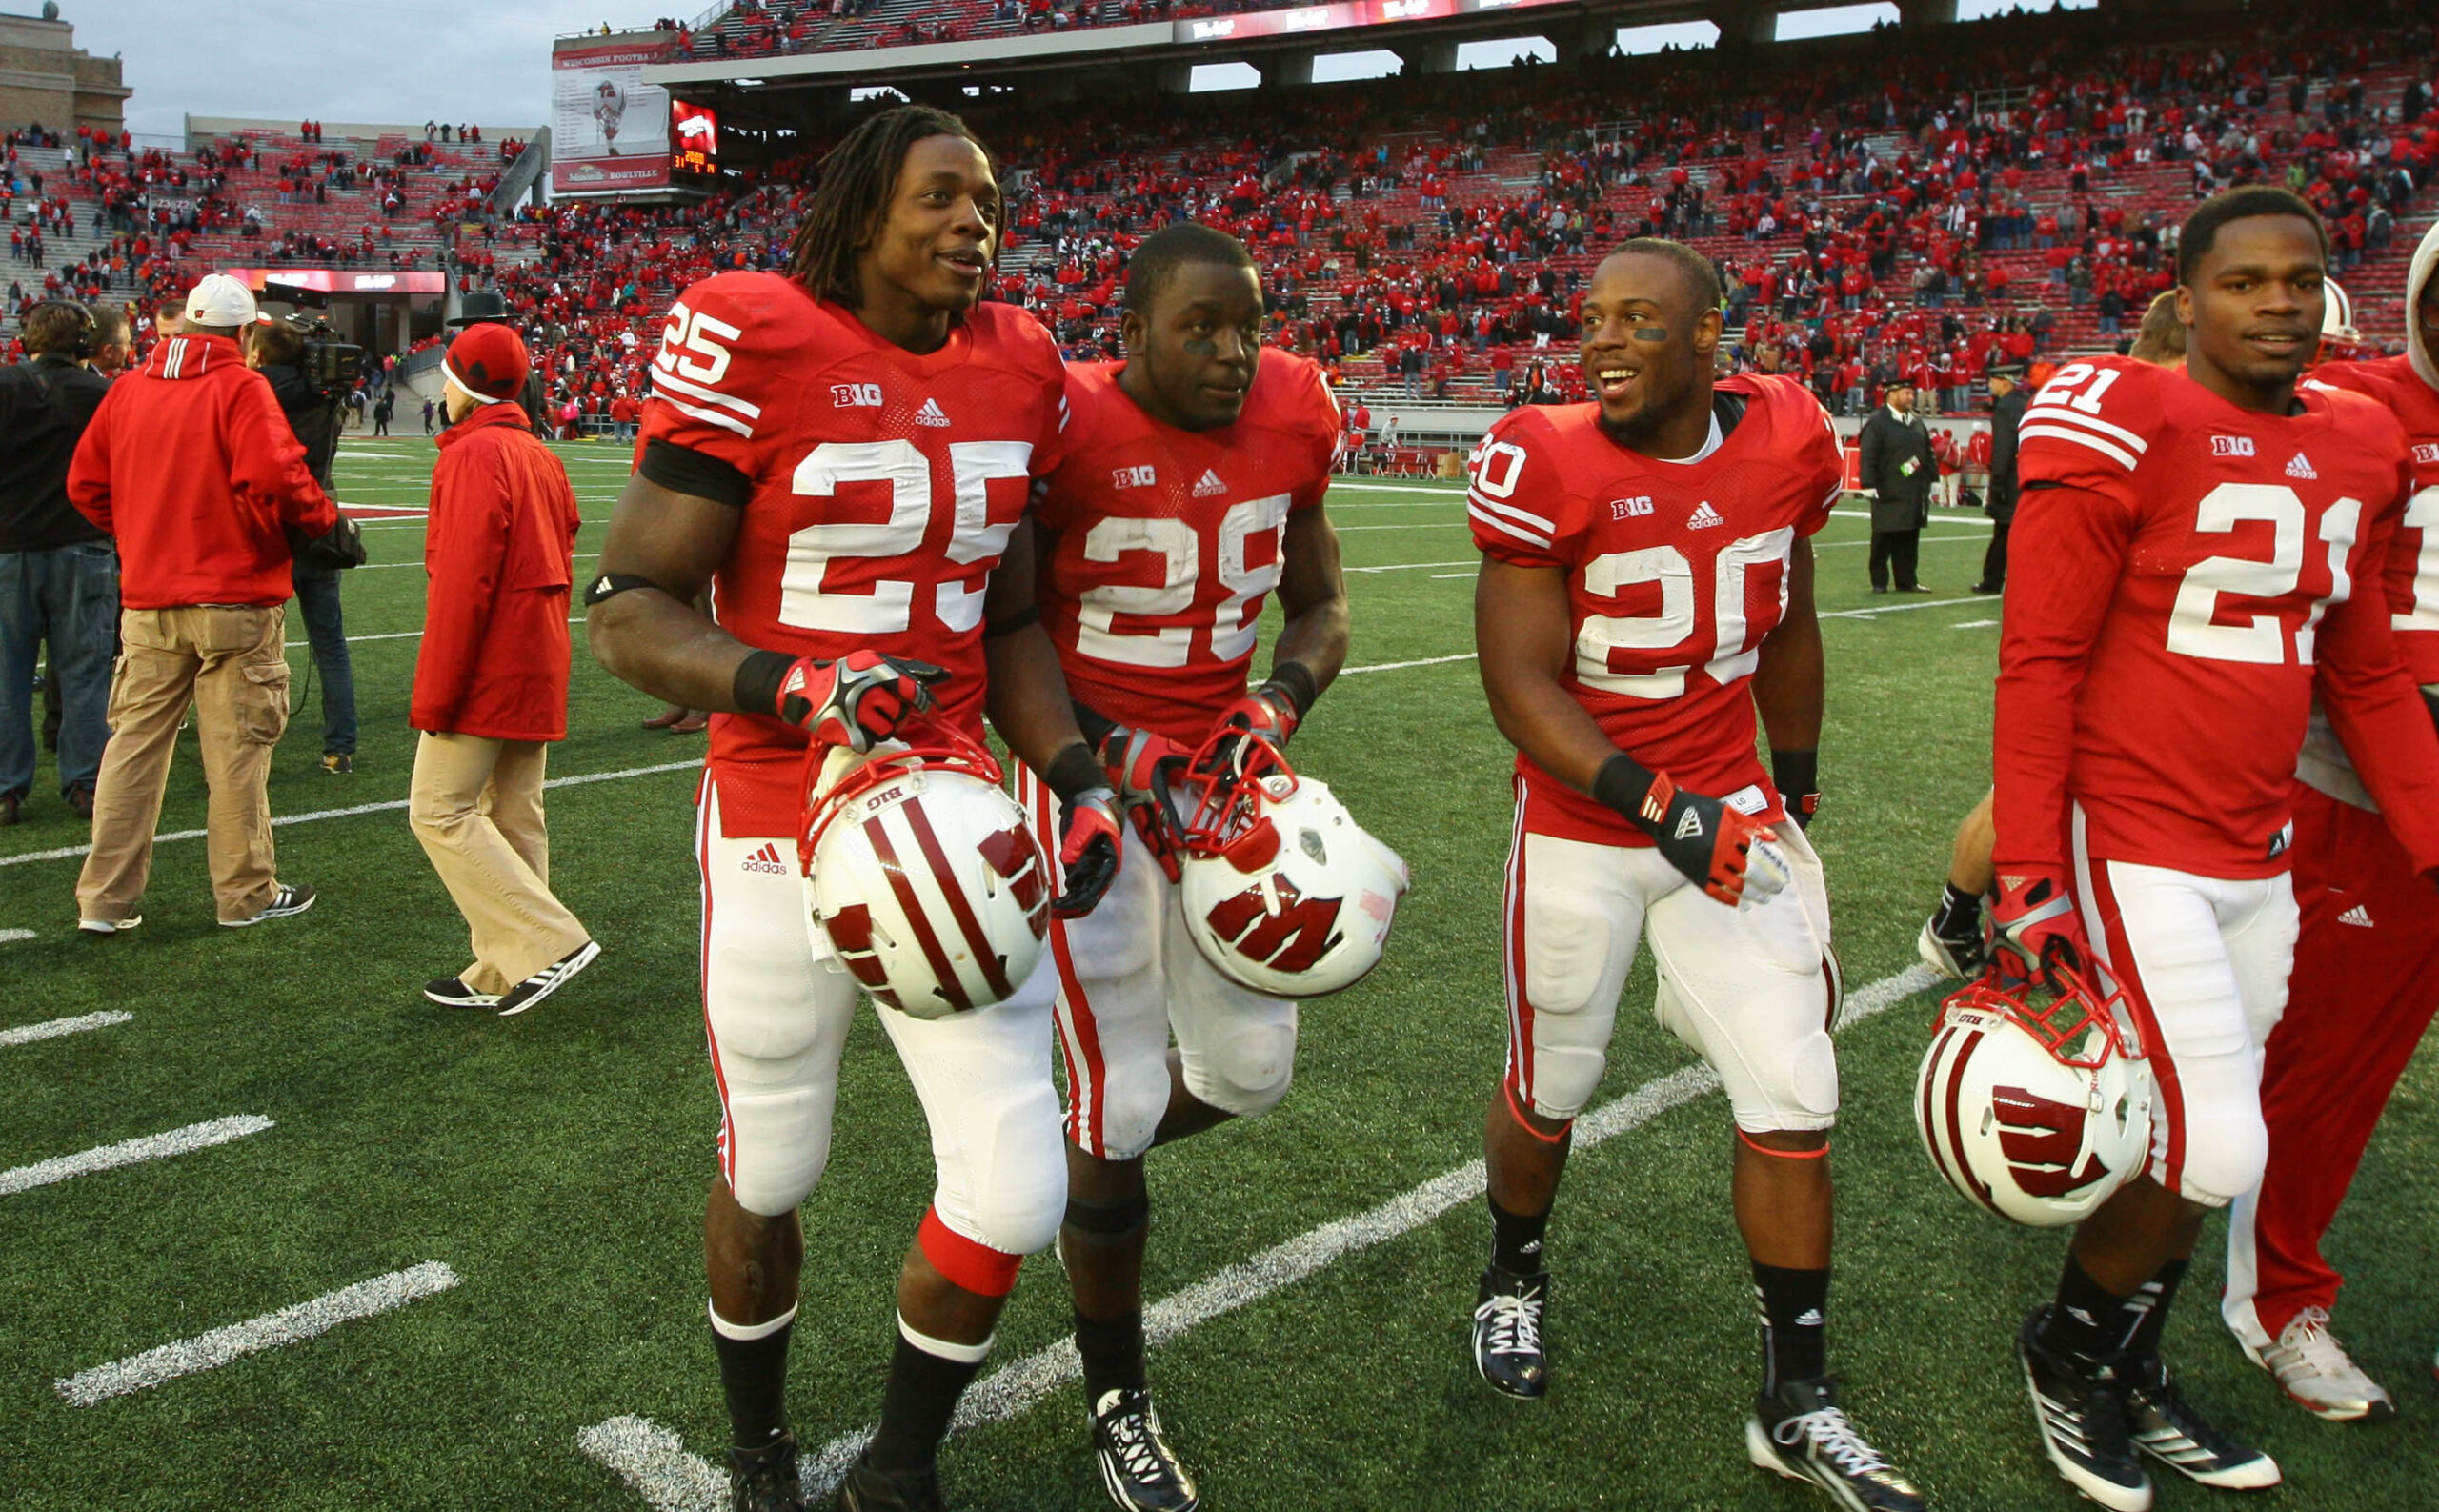 Wisconsin Badgers football legends Melvin Gordon, Montee Ball, and James White.